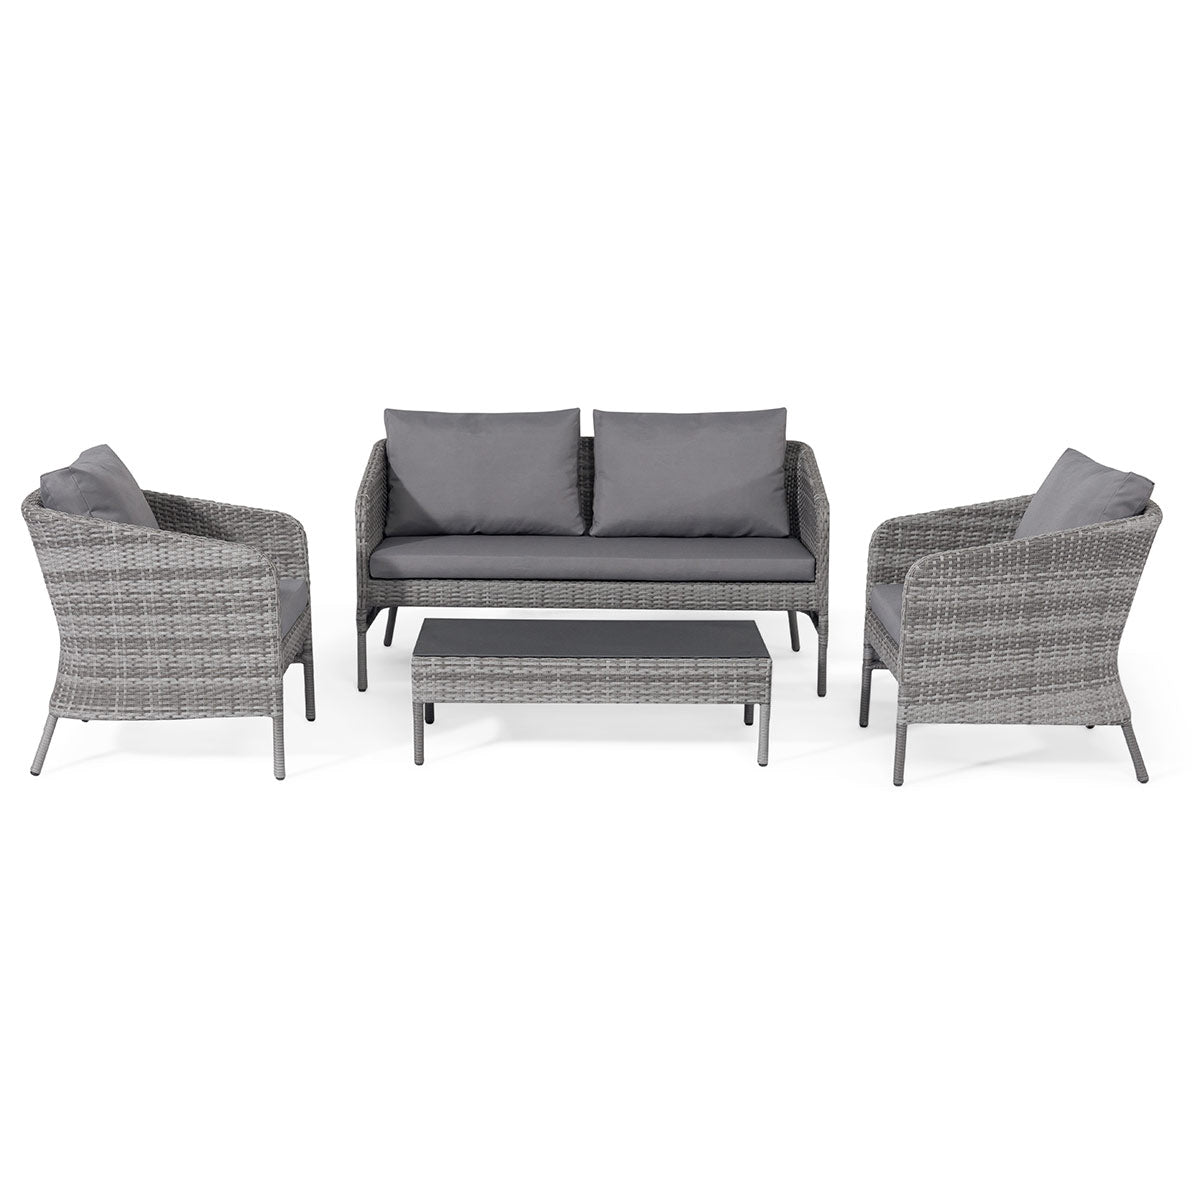 Grey rattan 2 seat sofa set with two chairs and coffee table